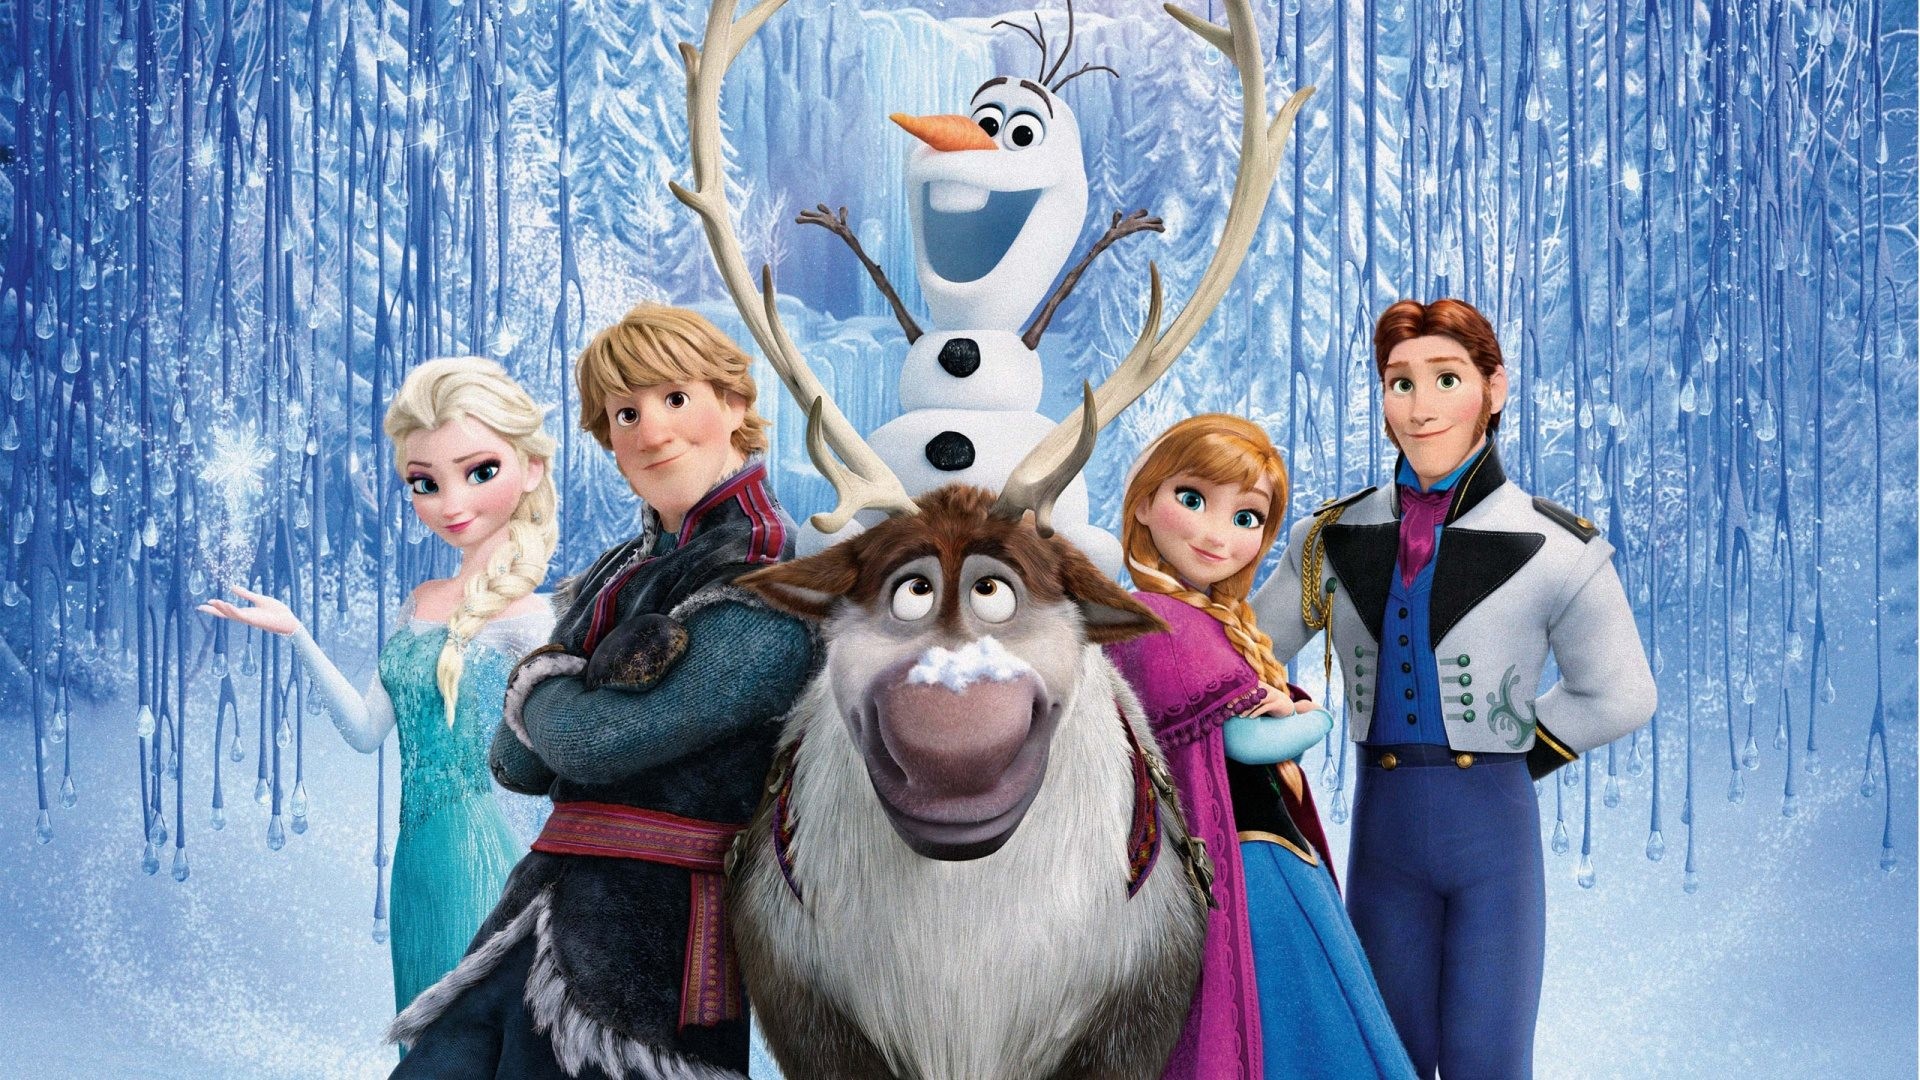 General 1920x1080 Frozen (movie) winter snow movies movie characters Elsa Olaf